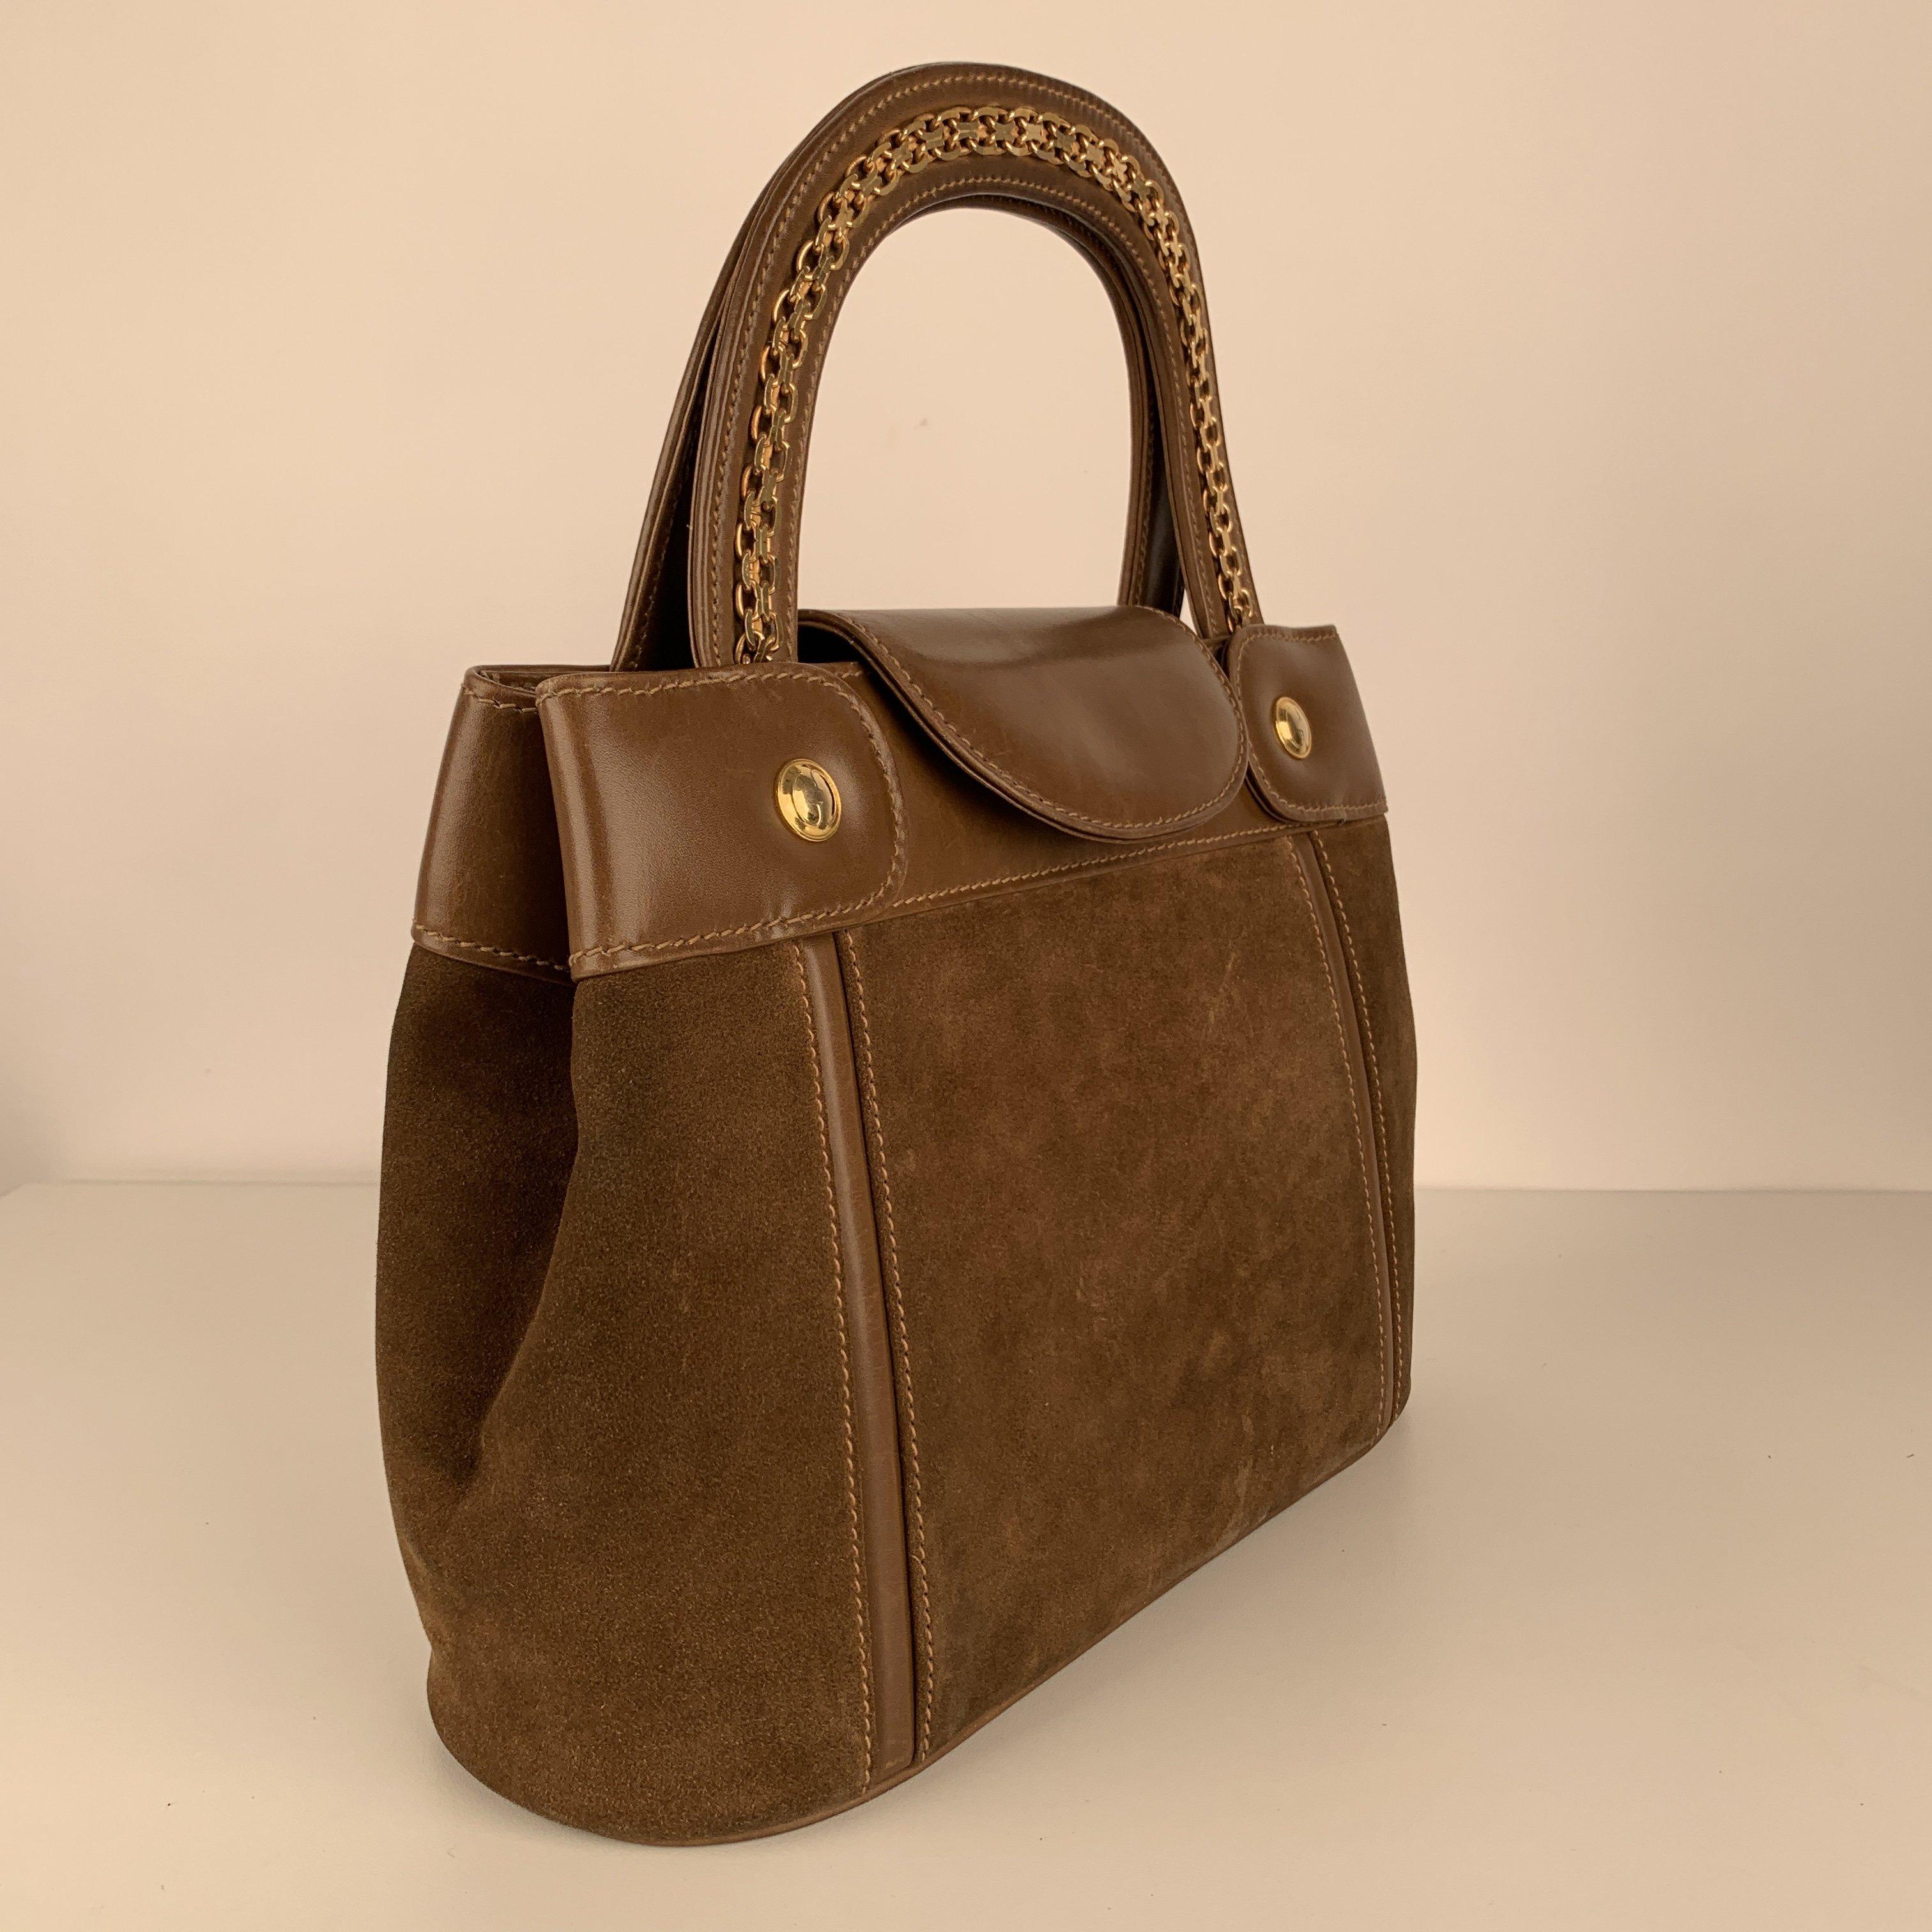 Gucci Vintage Tan Suede Leather Tote Handbag with Chain Detail In Excellent Condition In Rome, Rome